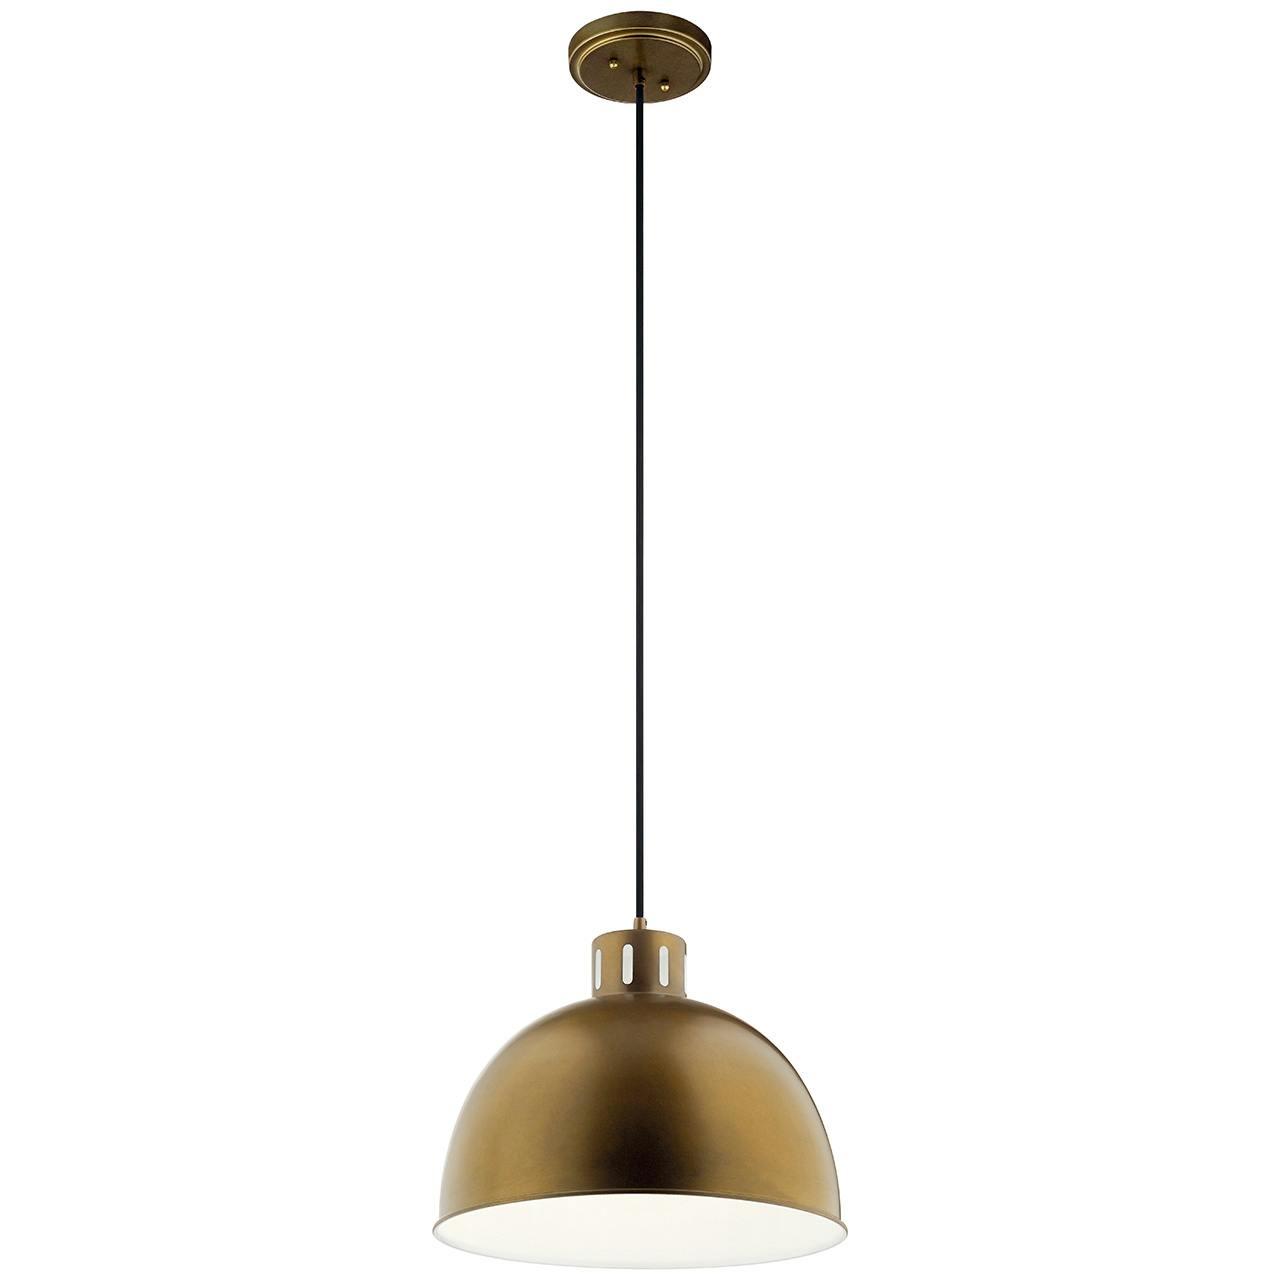 Zailey 15.75" 1 Light Pendant in Brass on a white background